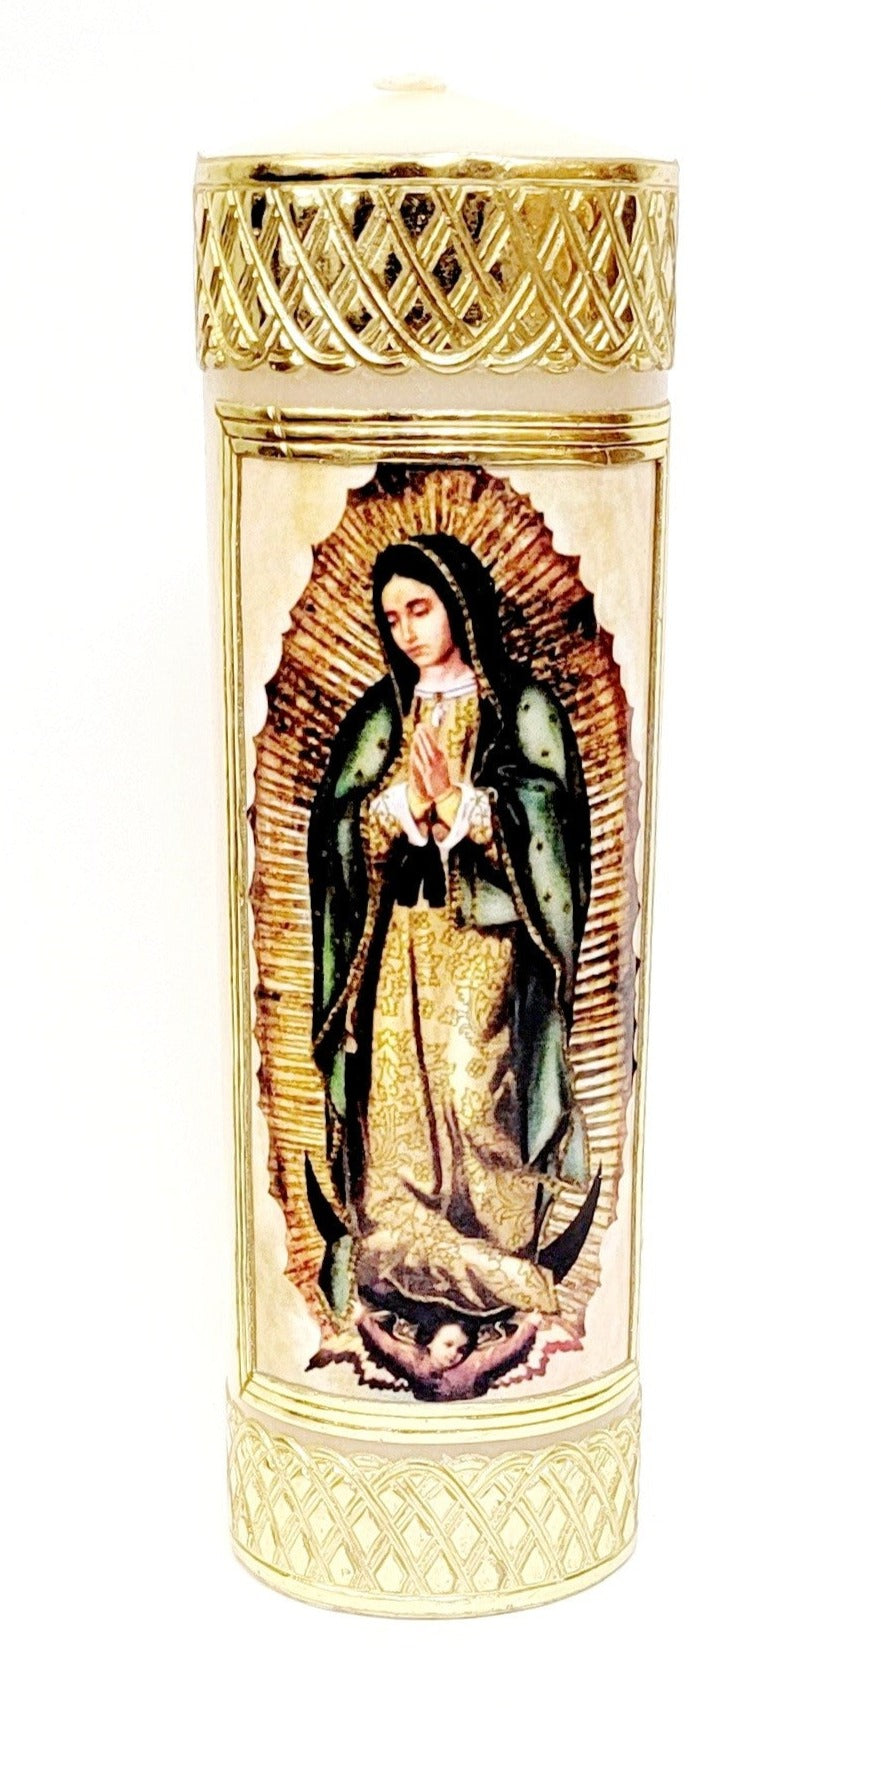 8" x 2" Our Lady of Guadalupe Full Body Cirio